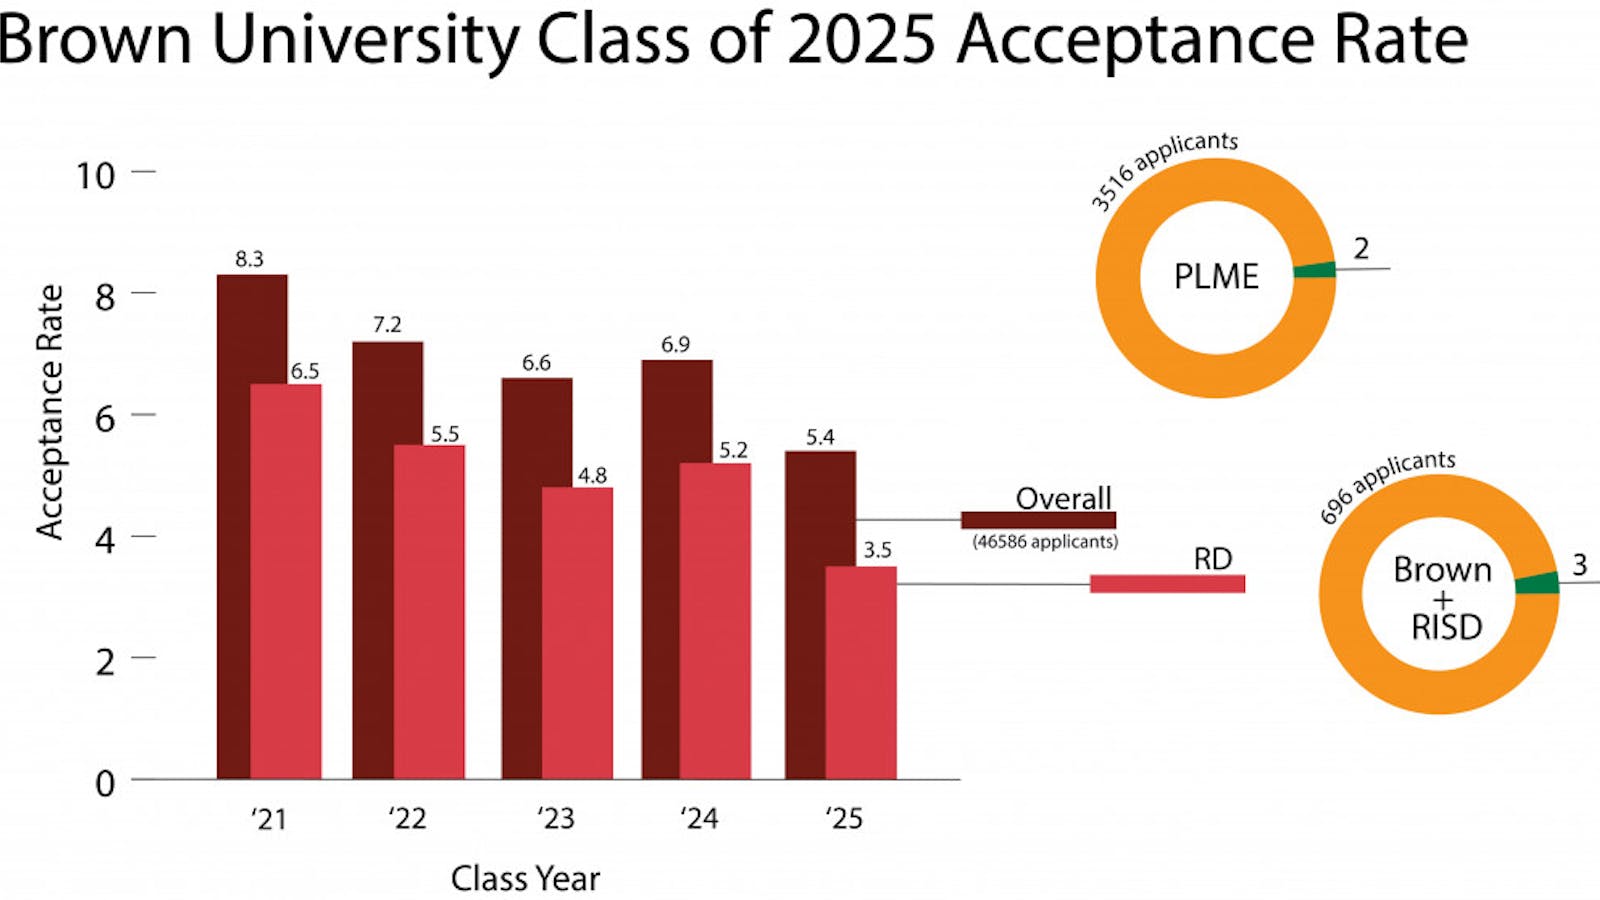 Brown admits record-low 5.4 percent of applicants to the class of 2025 -  The Brown Daily Herald